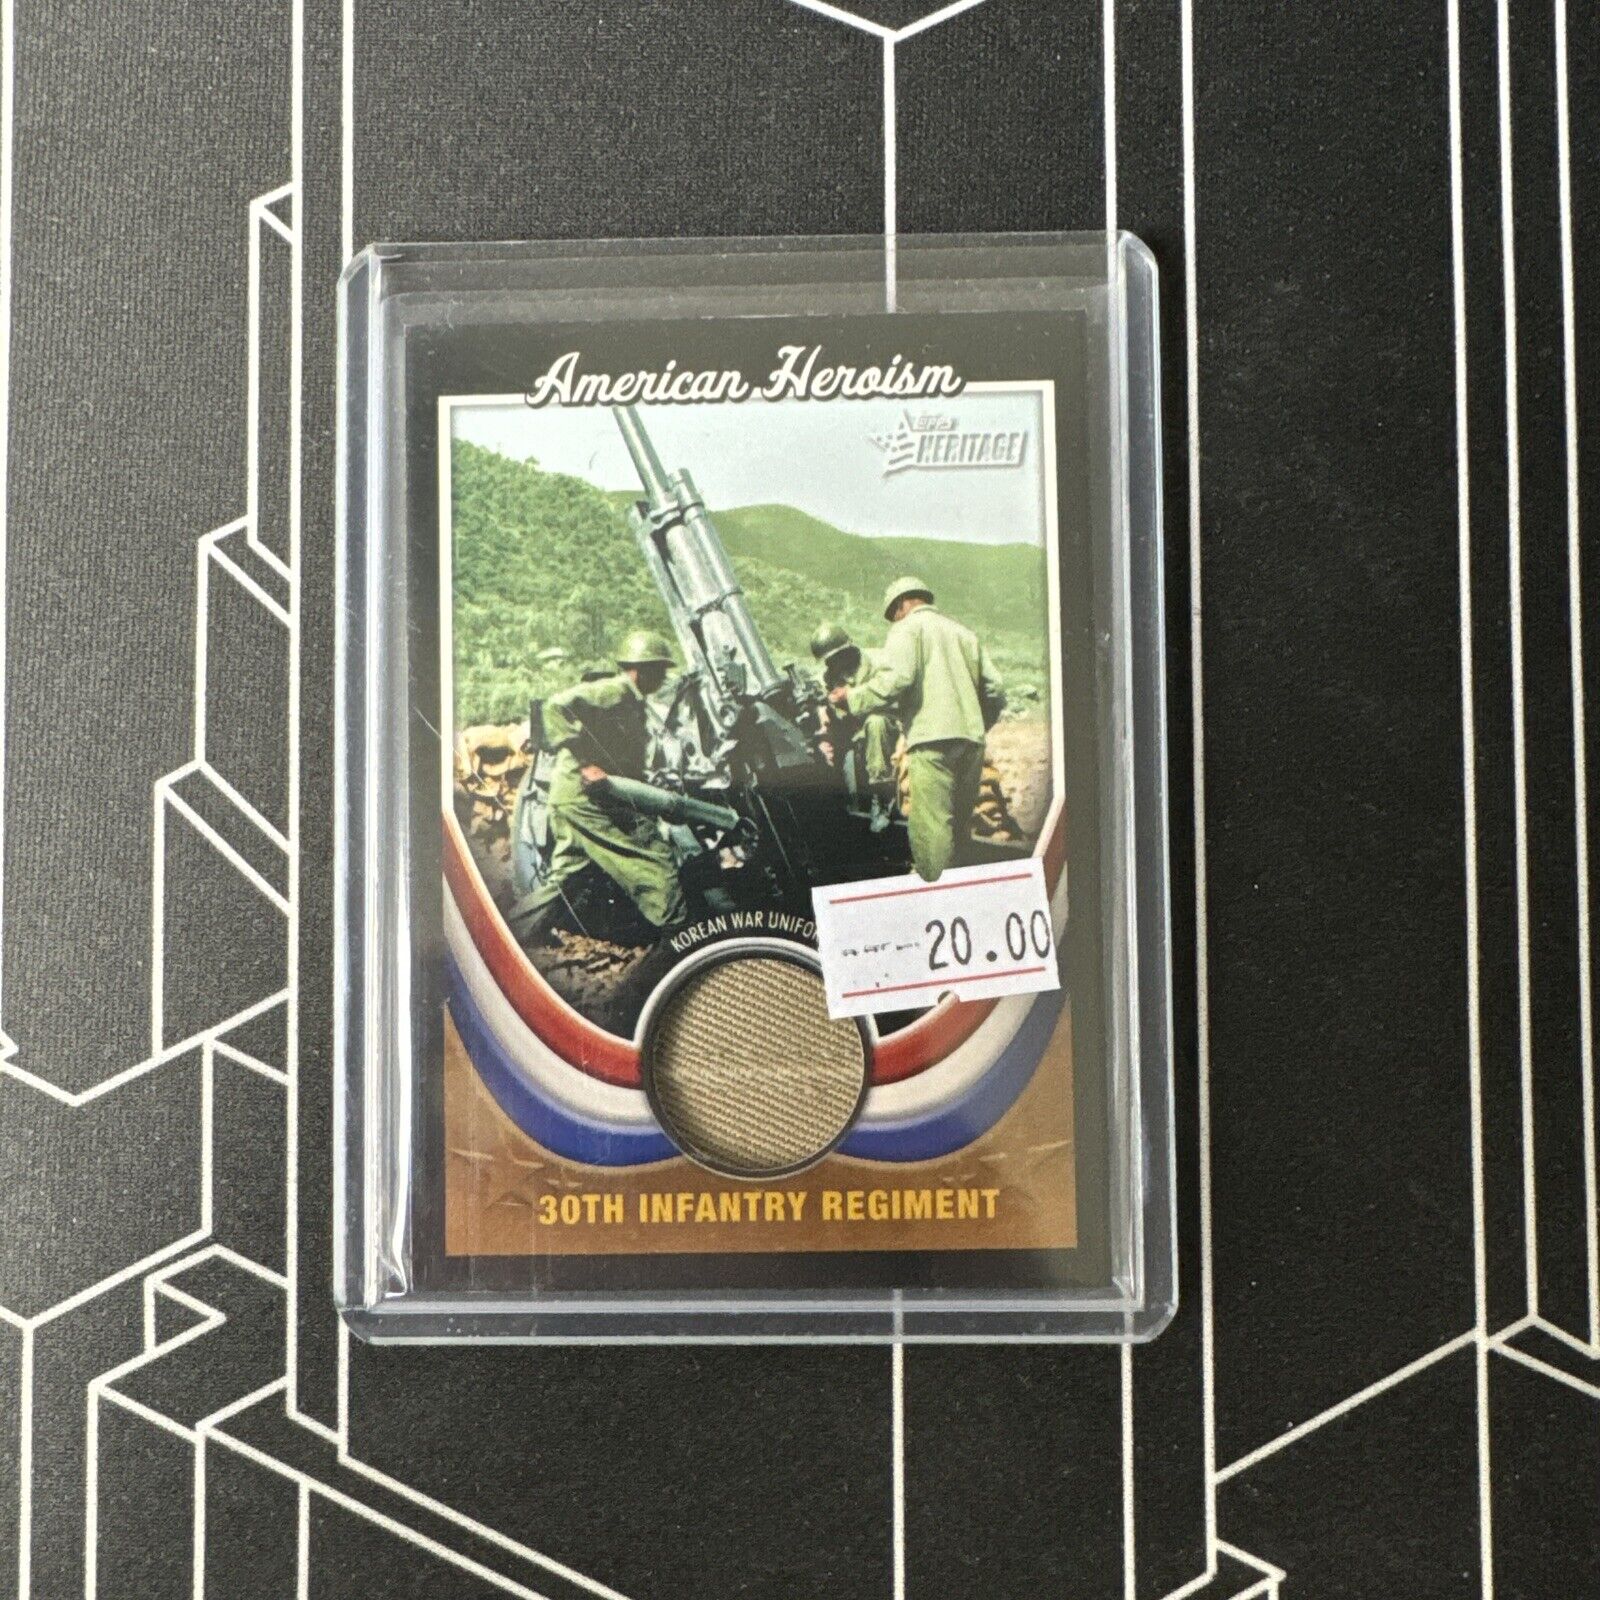 2009 TOPPS AMERICAN HERITAGE AMERICAN HEROISM 30TH INFANTRY REGIMENT SWATCH